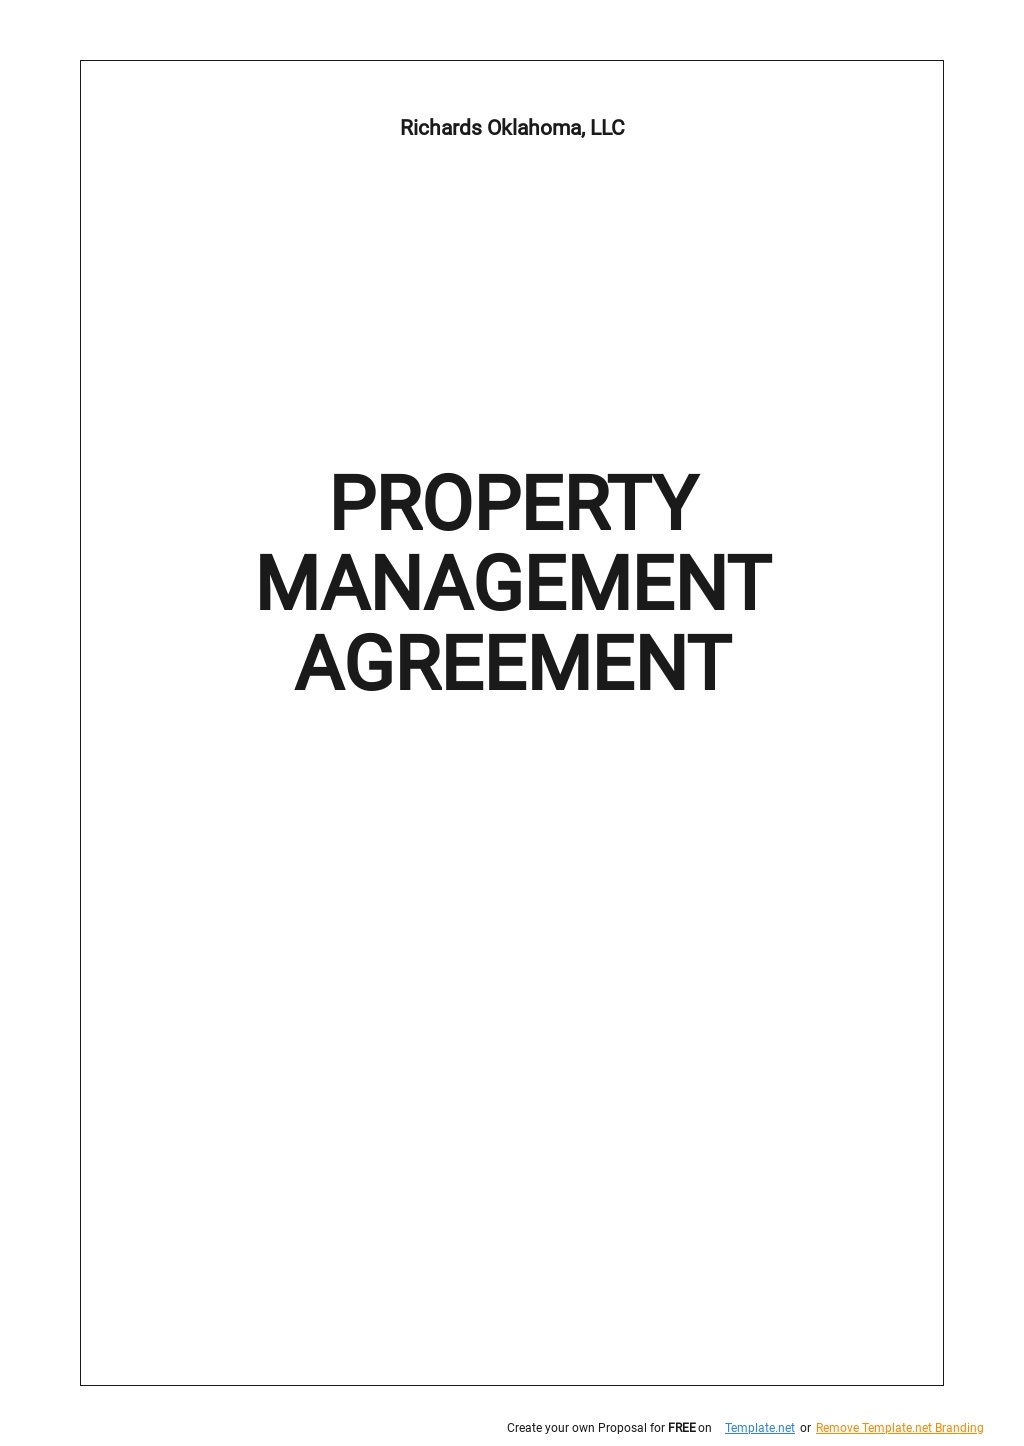 Property Management Agreement Template.jpe